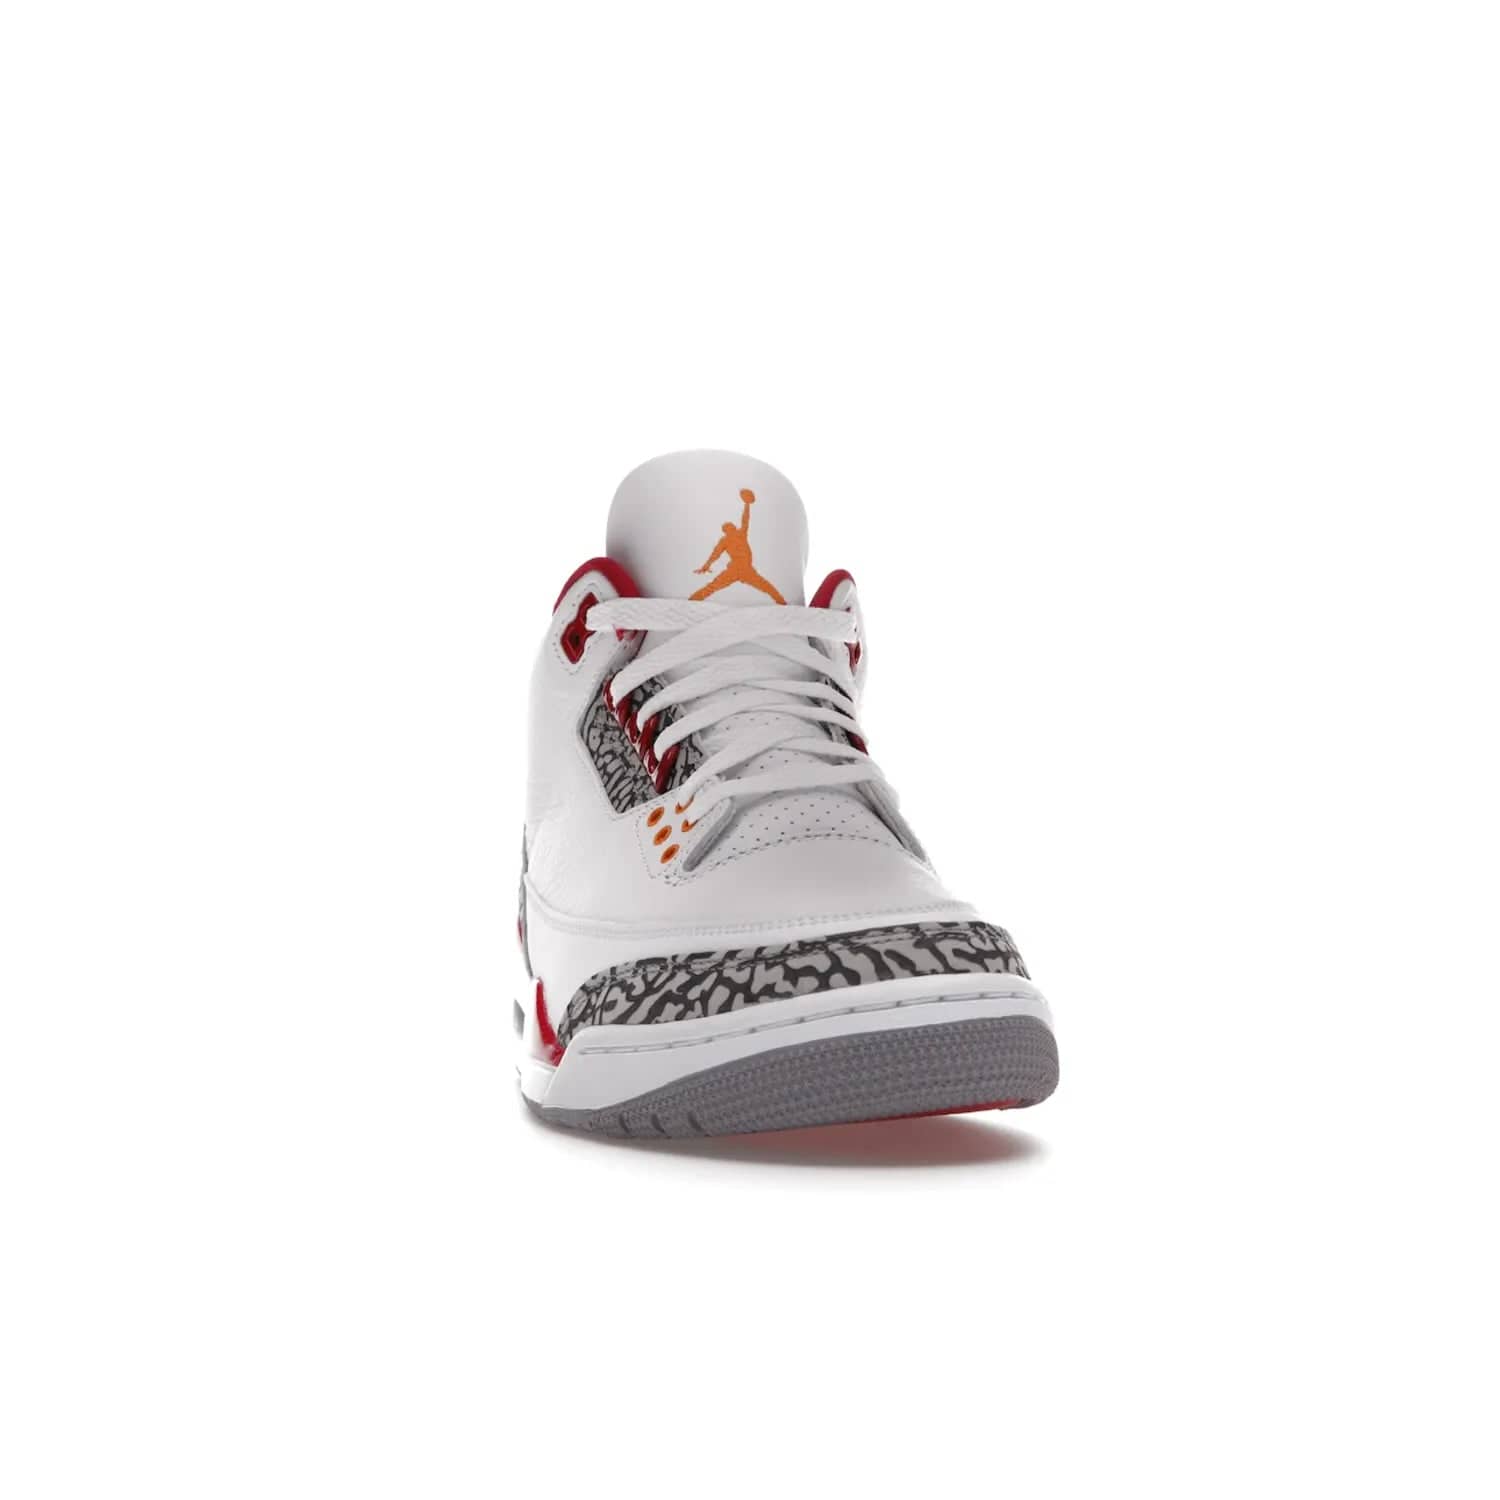 Jordan 3 Retro Cardinal Red - Image 9 - Only at www.BallersClubKickz.com - Air Jordan 3 Retro Cardinal Red combines classic style and modern appeal - white tumbled leather, signature Elephant Print overlays, cardinal red midsoles, Jumpman logo embroidery. Available Feb 2022.